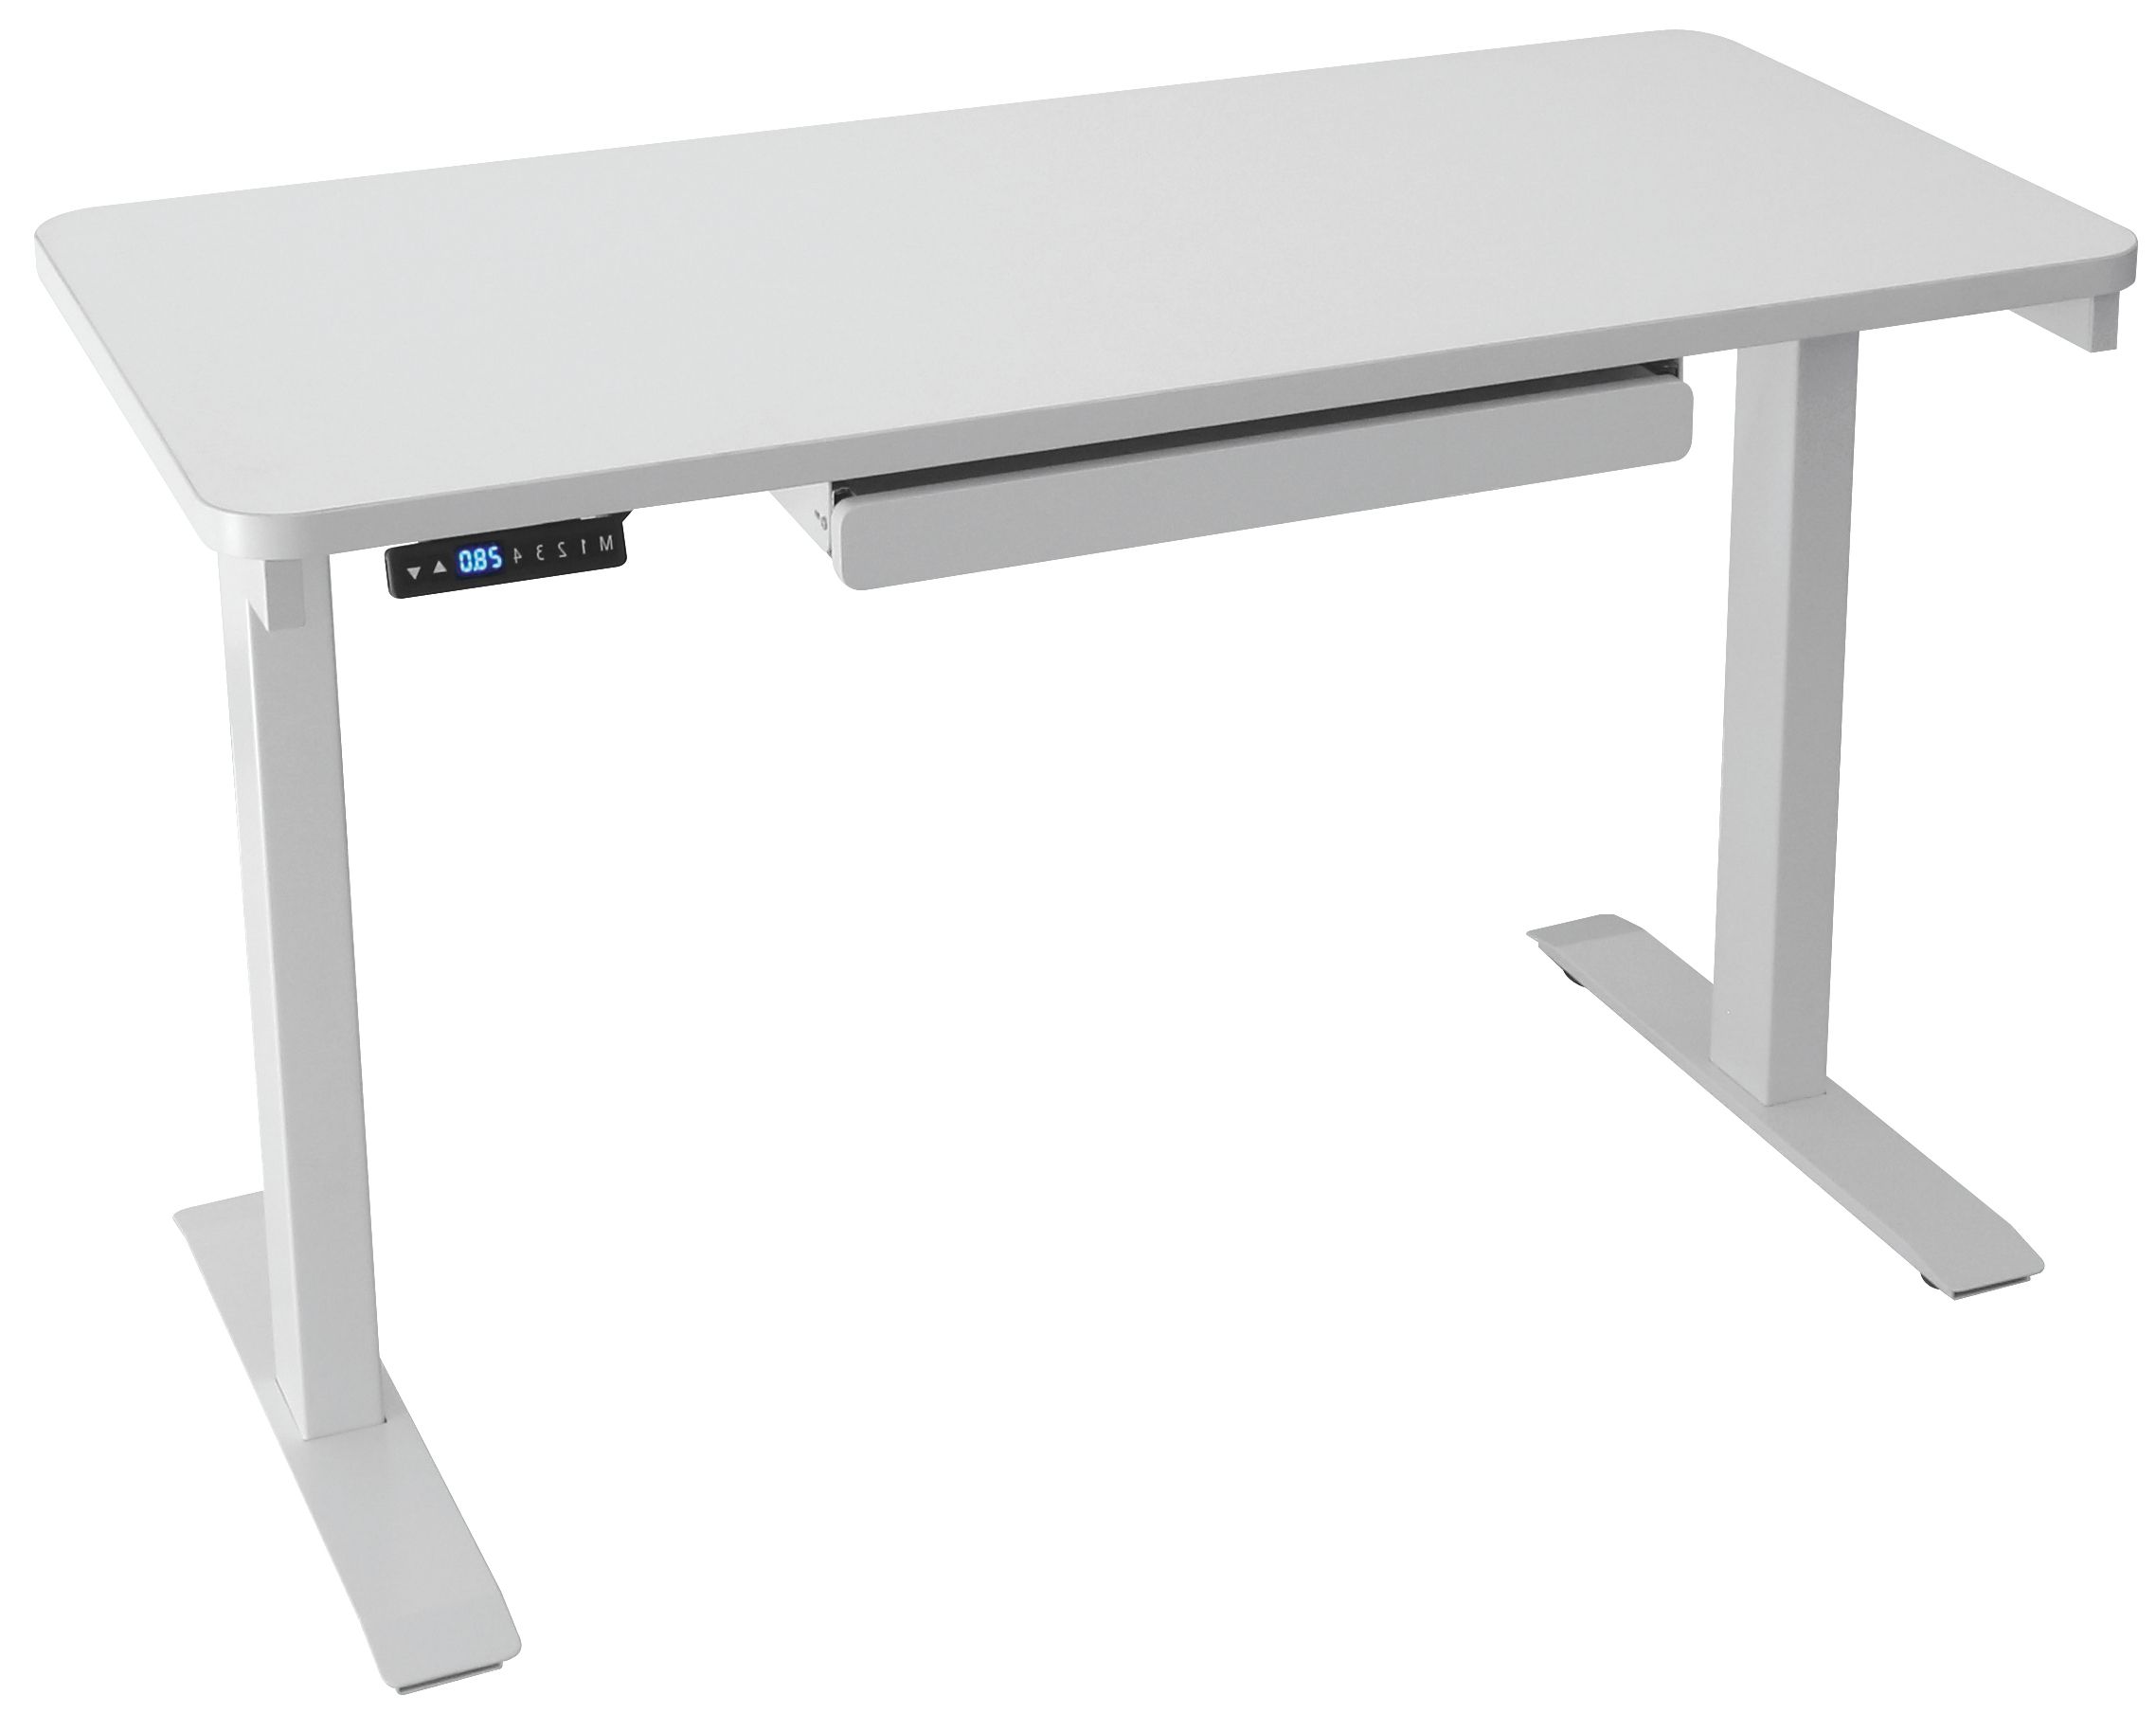 Motionwise Black Electric Height Adjustable Standing Desk, 24"x48 Inside Most Popular White Adjustable Stand Up Desks (View 7 of 15)